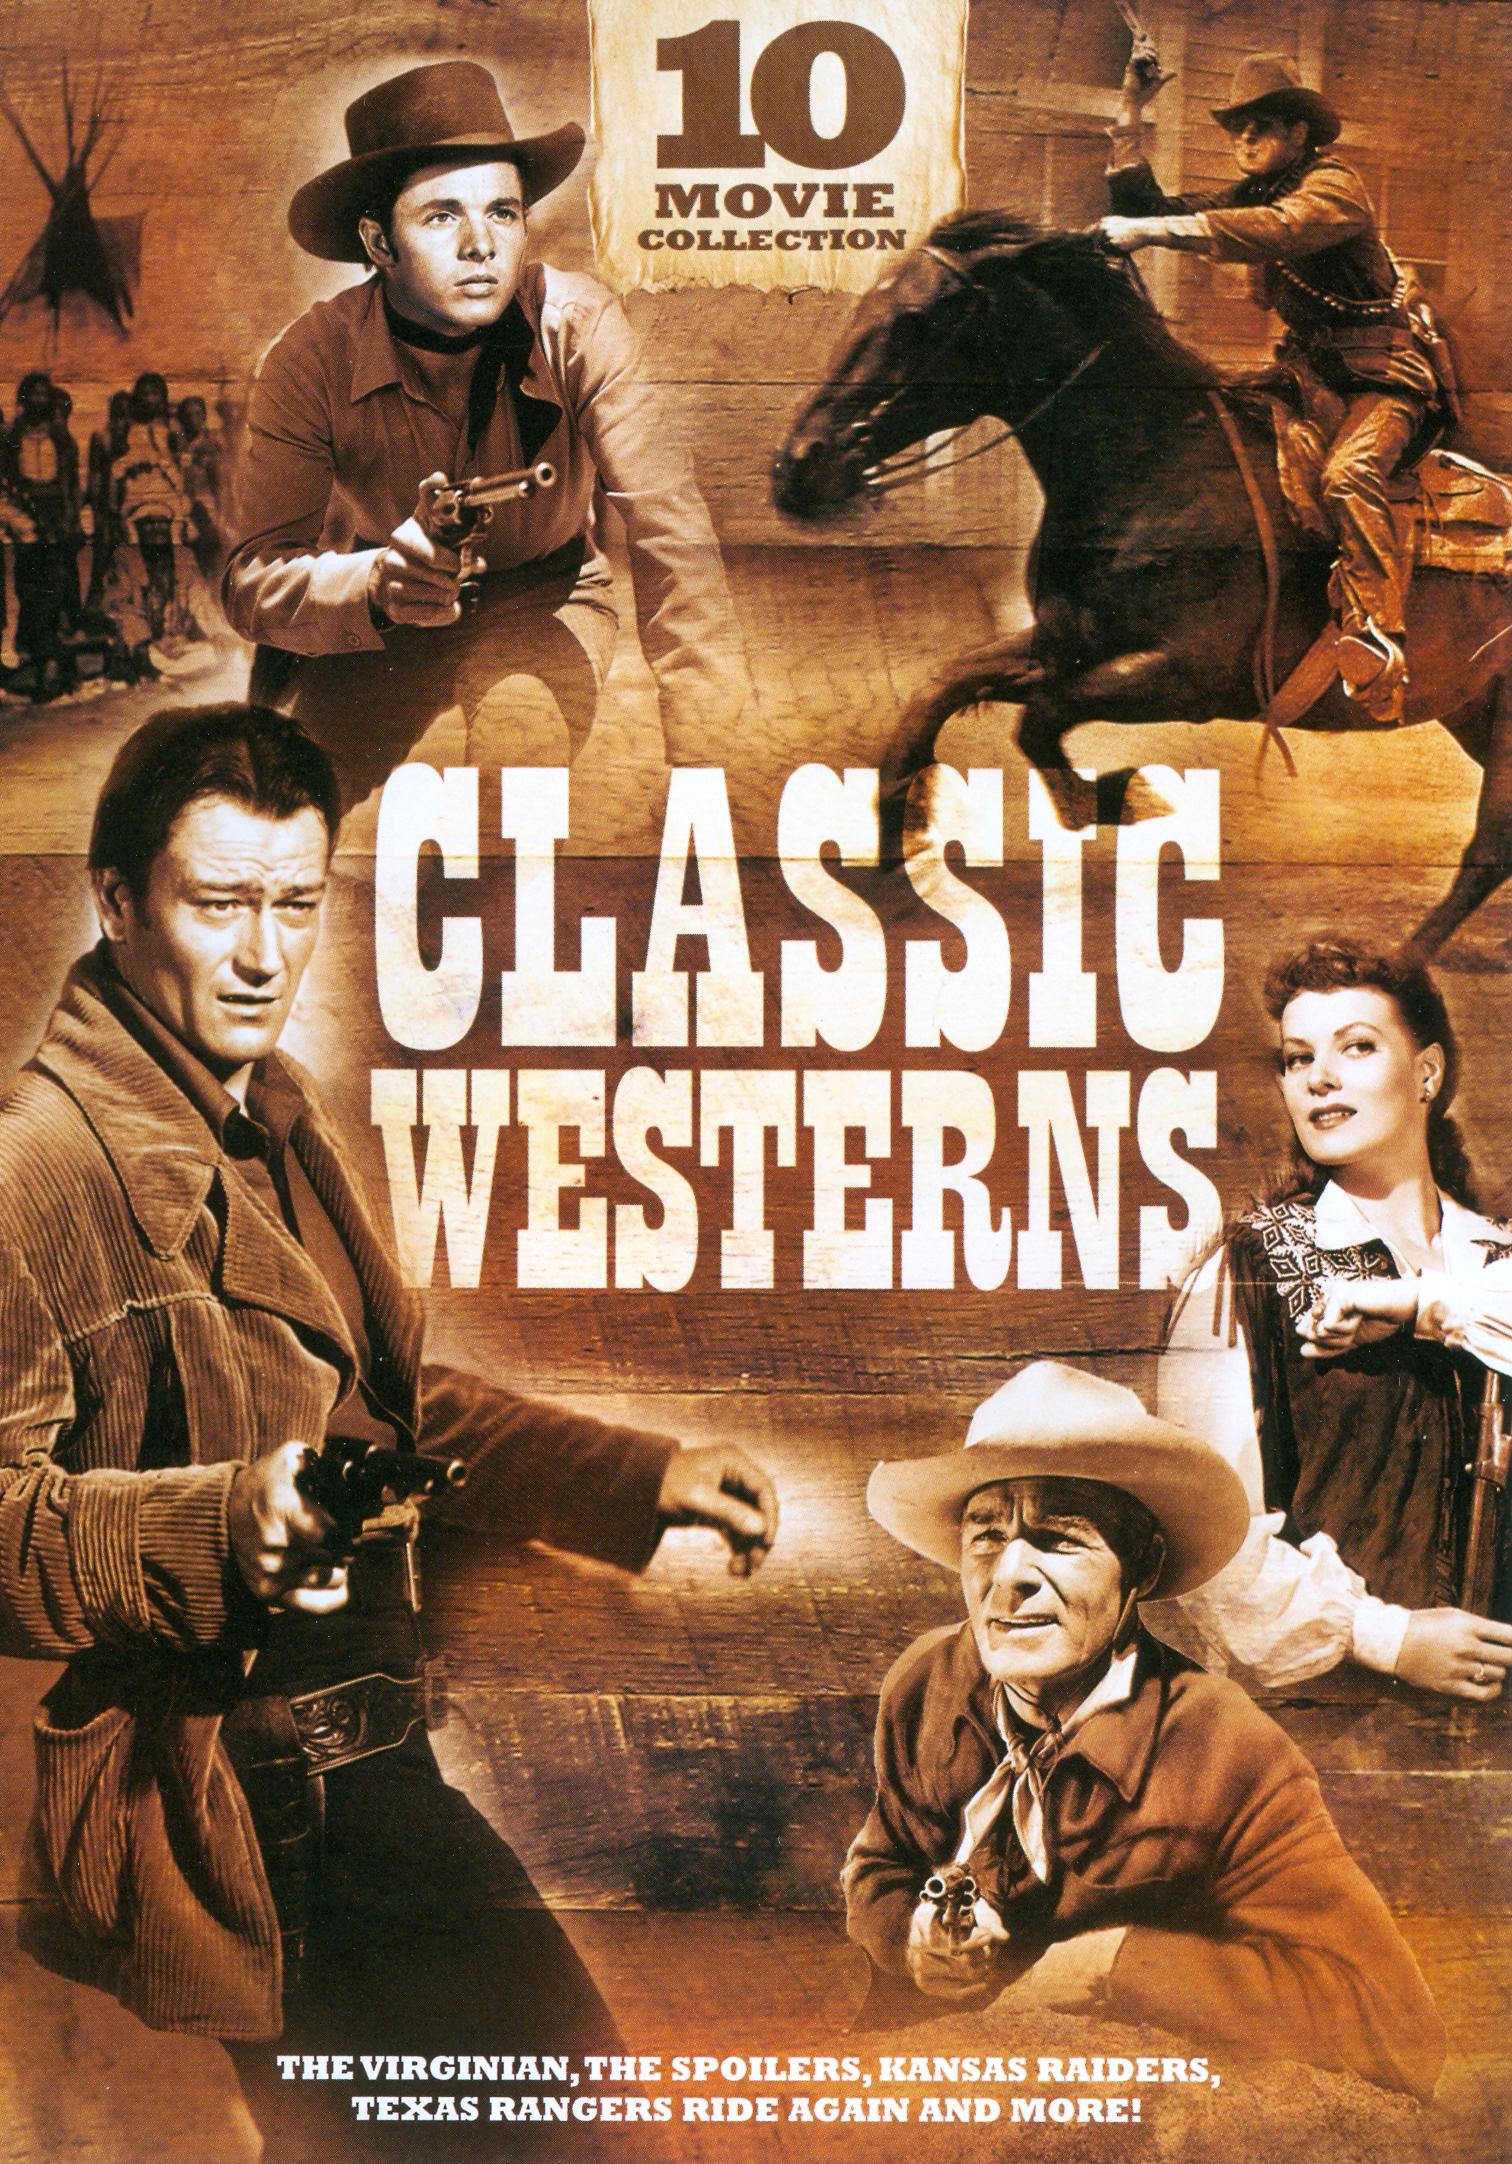 Louis L'Amour Western Collection (DVD)